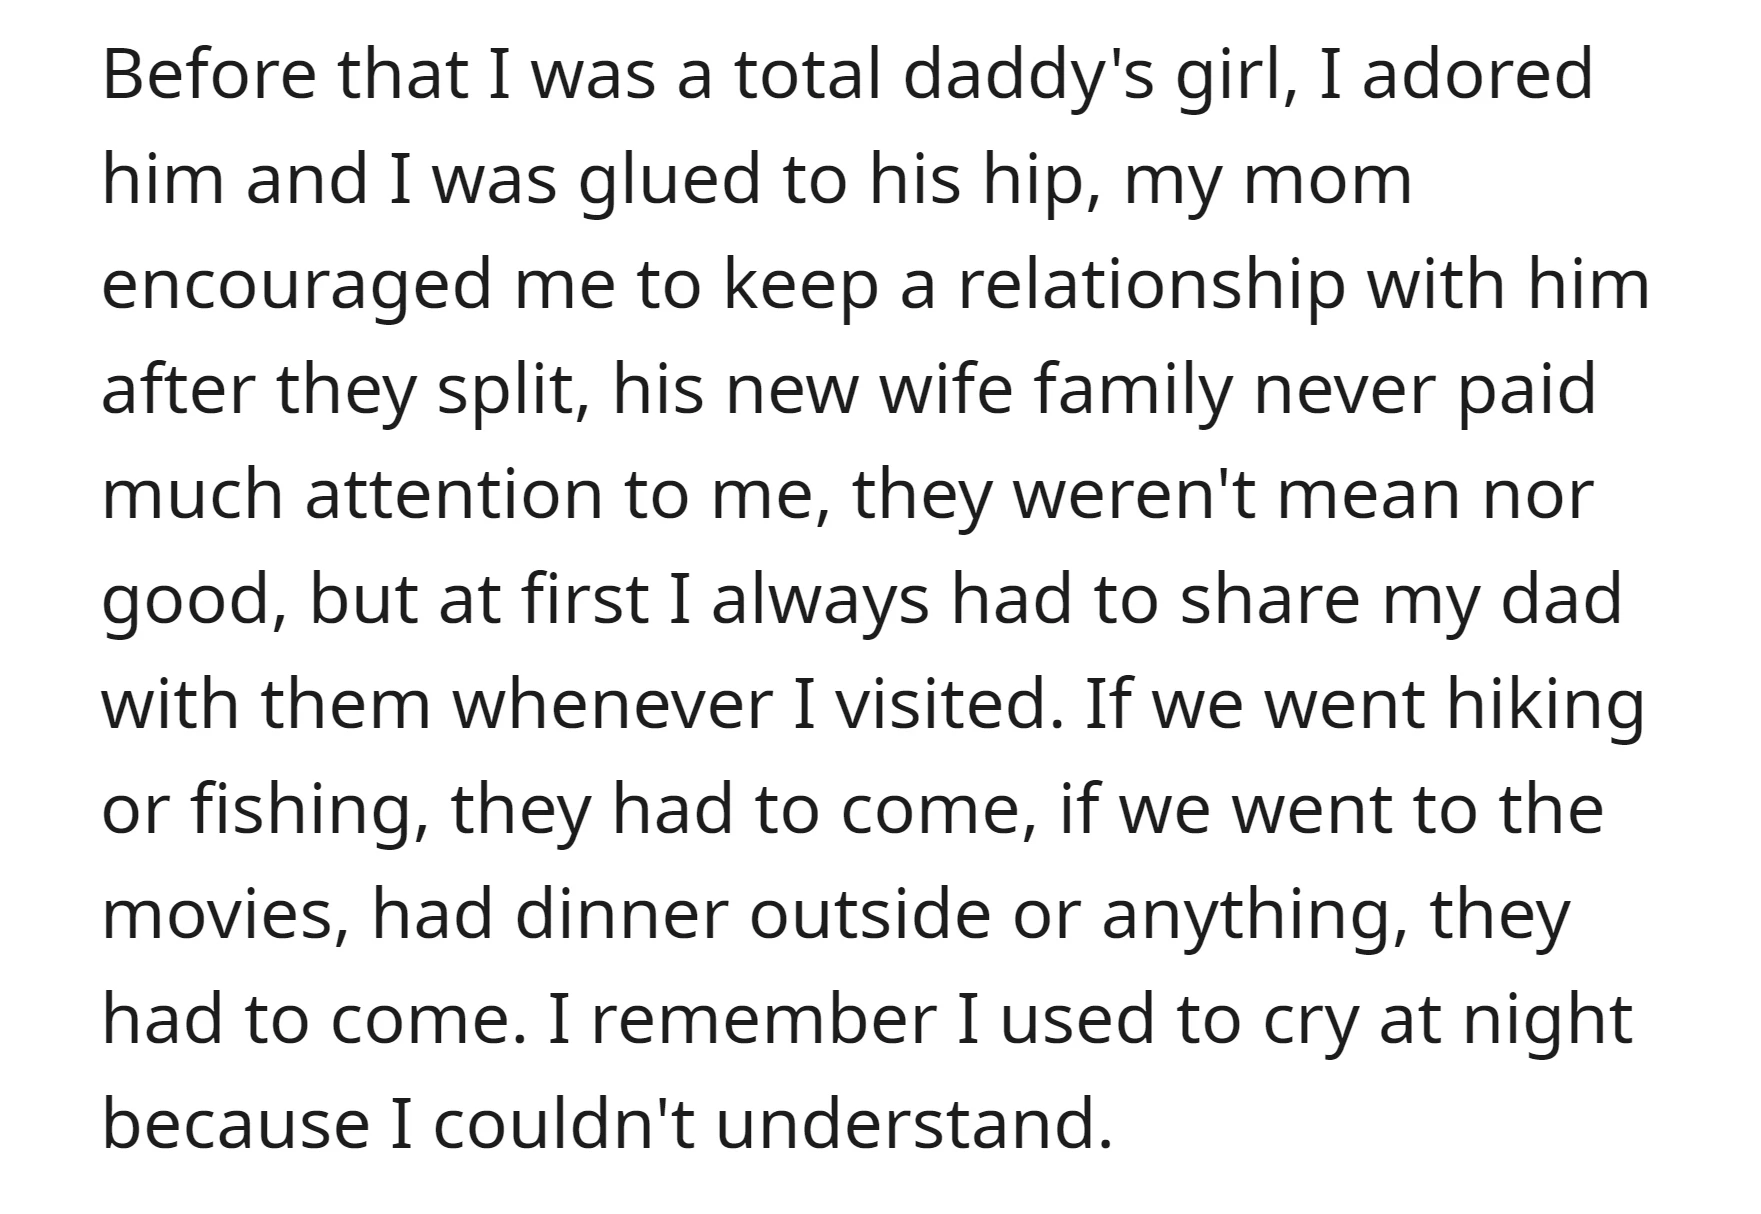 OP was a devoted daddy's girl